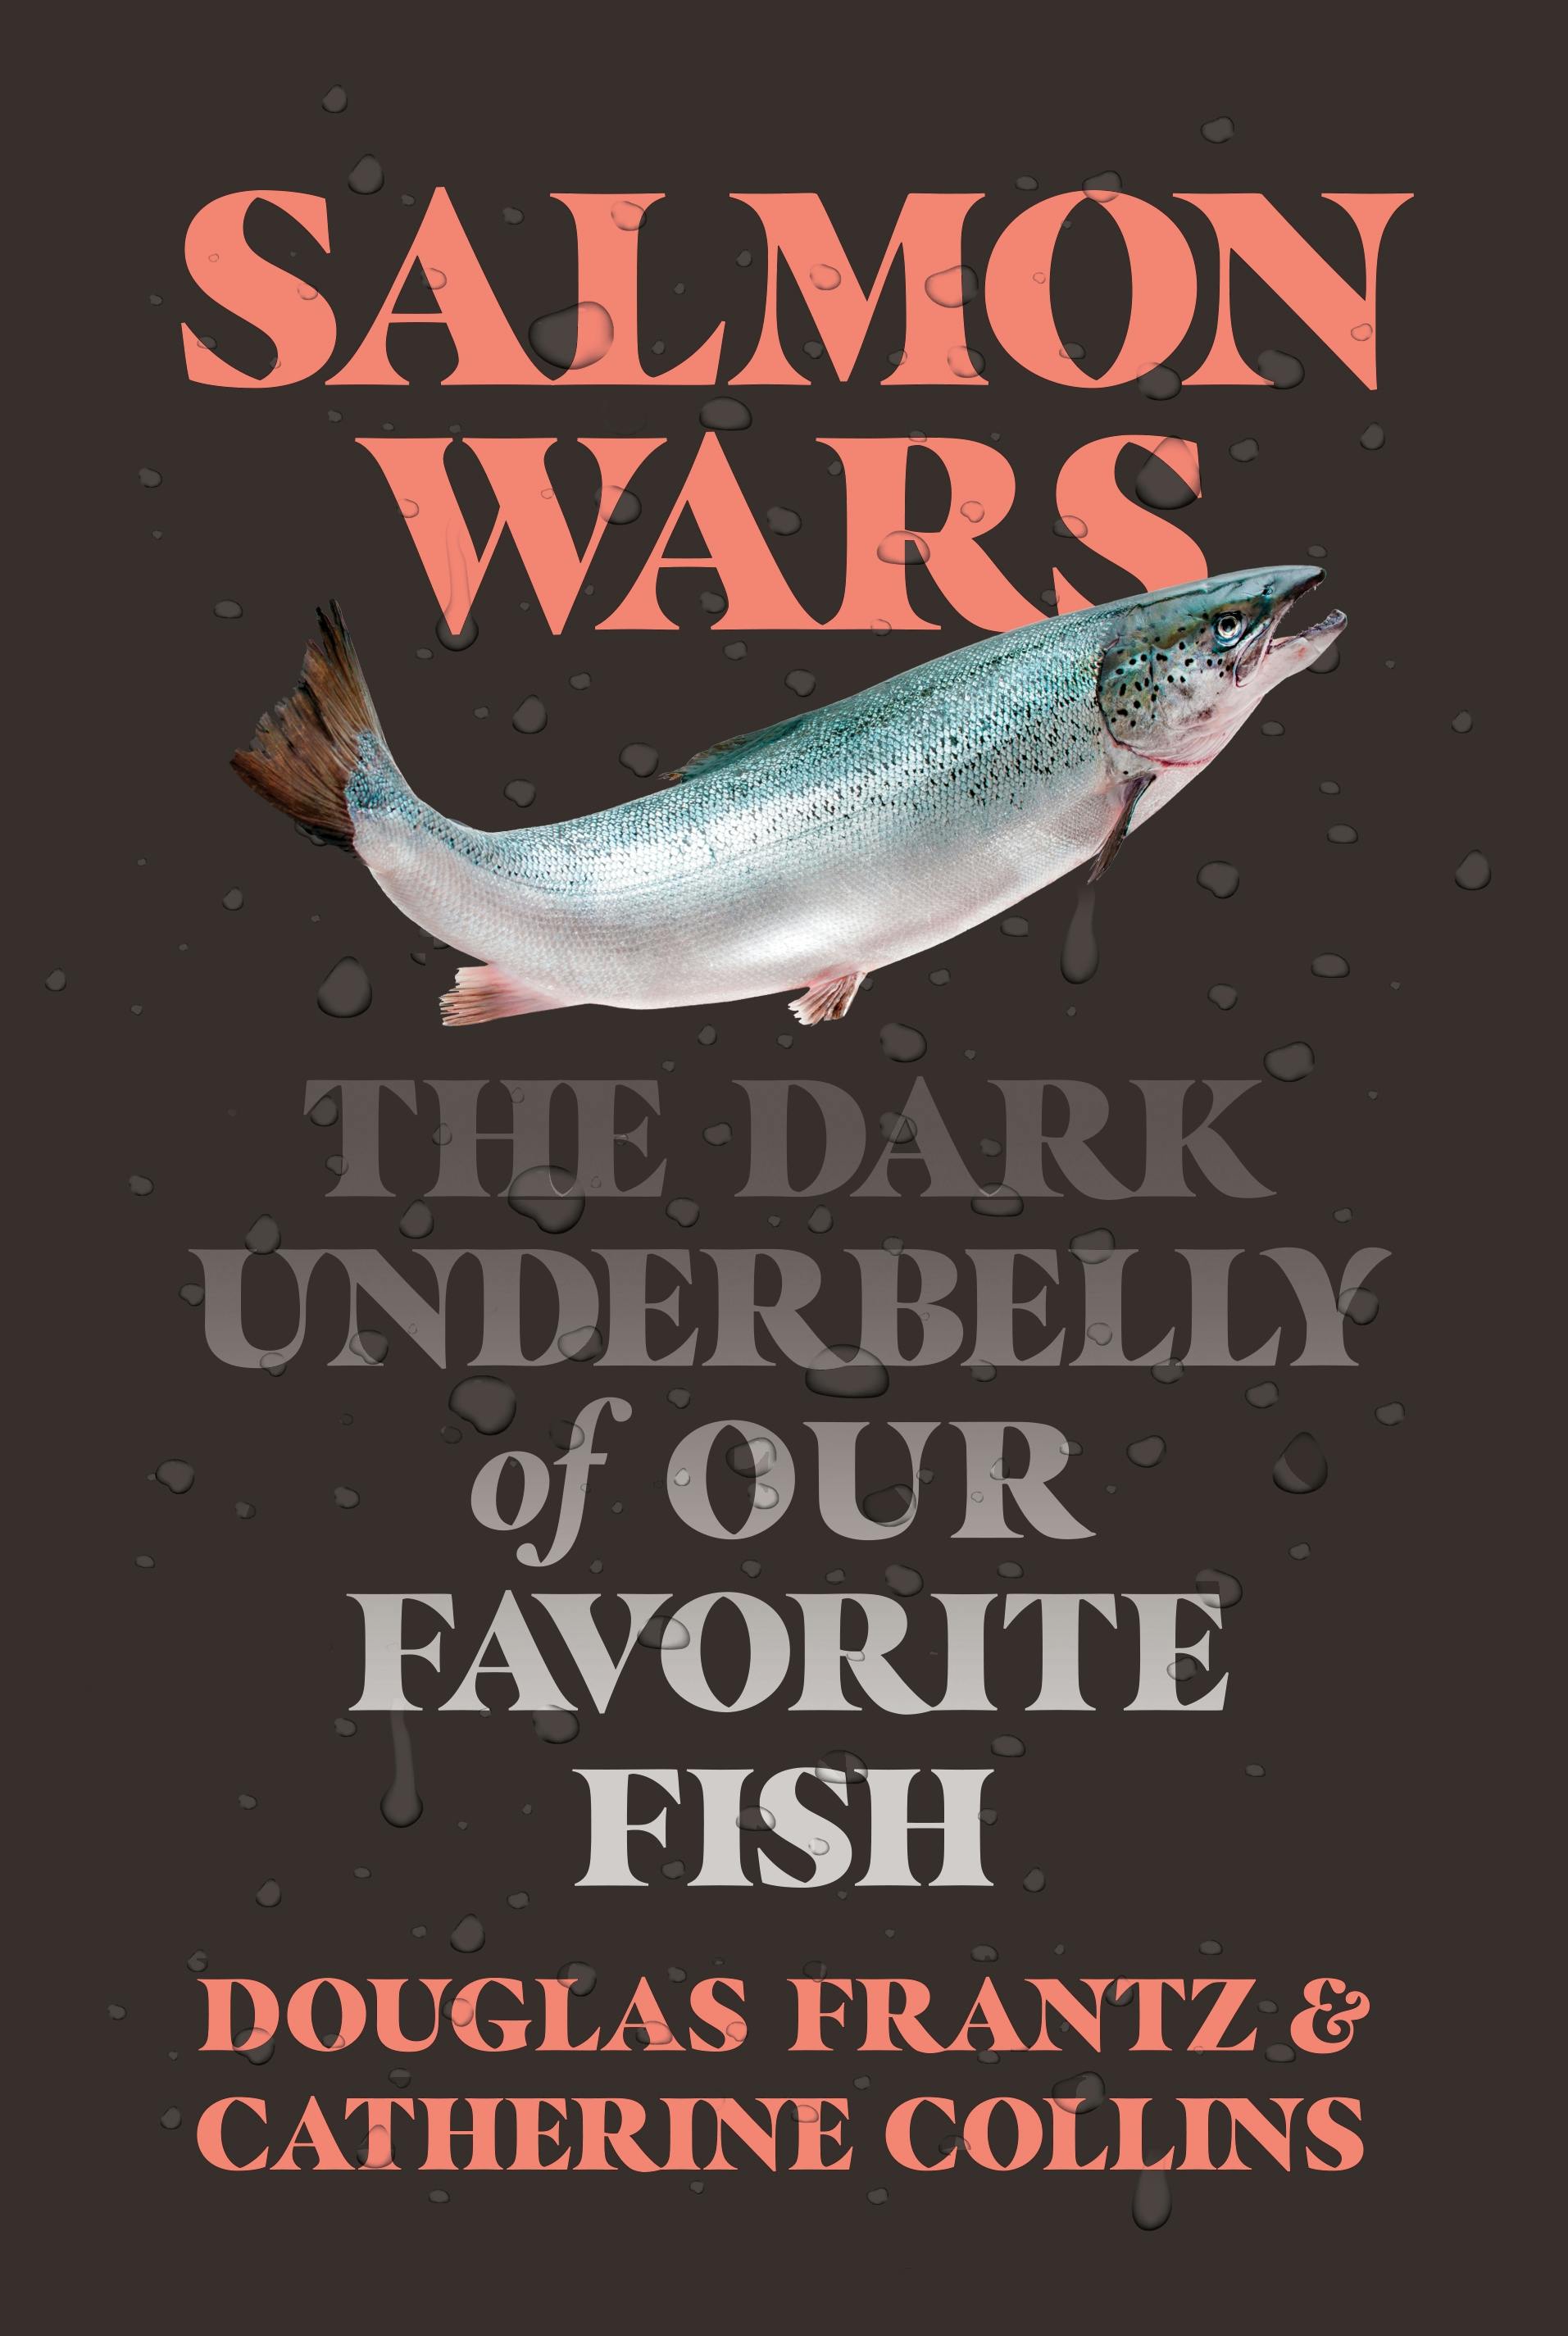 Salmon: The History And Future Of A Sought-After Fish